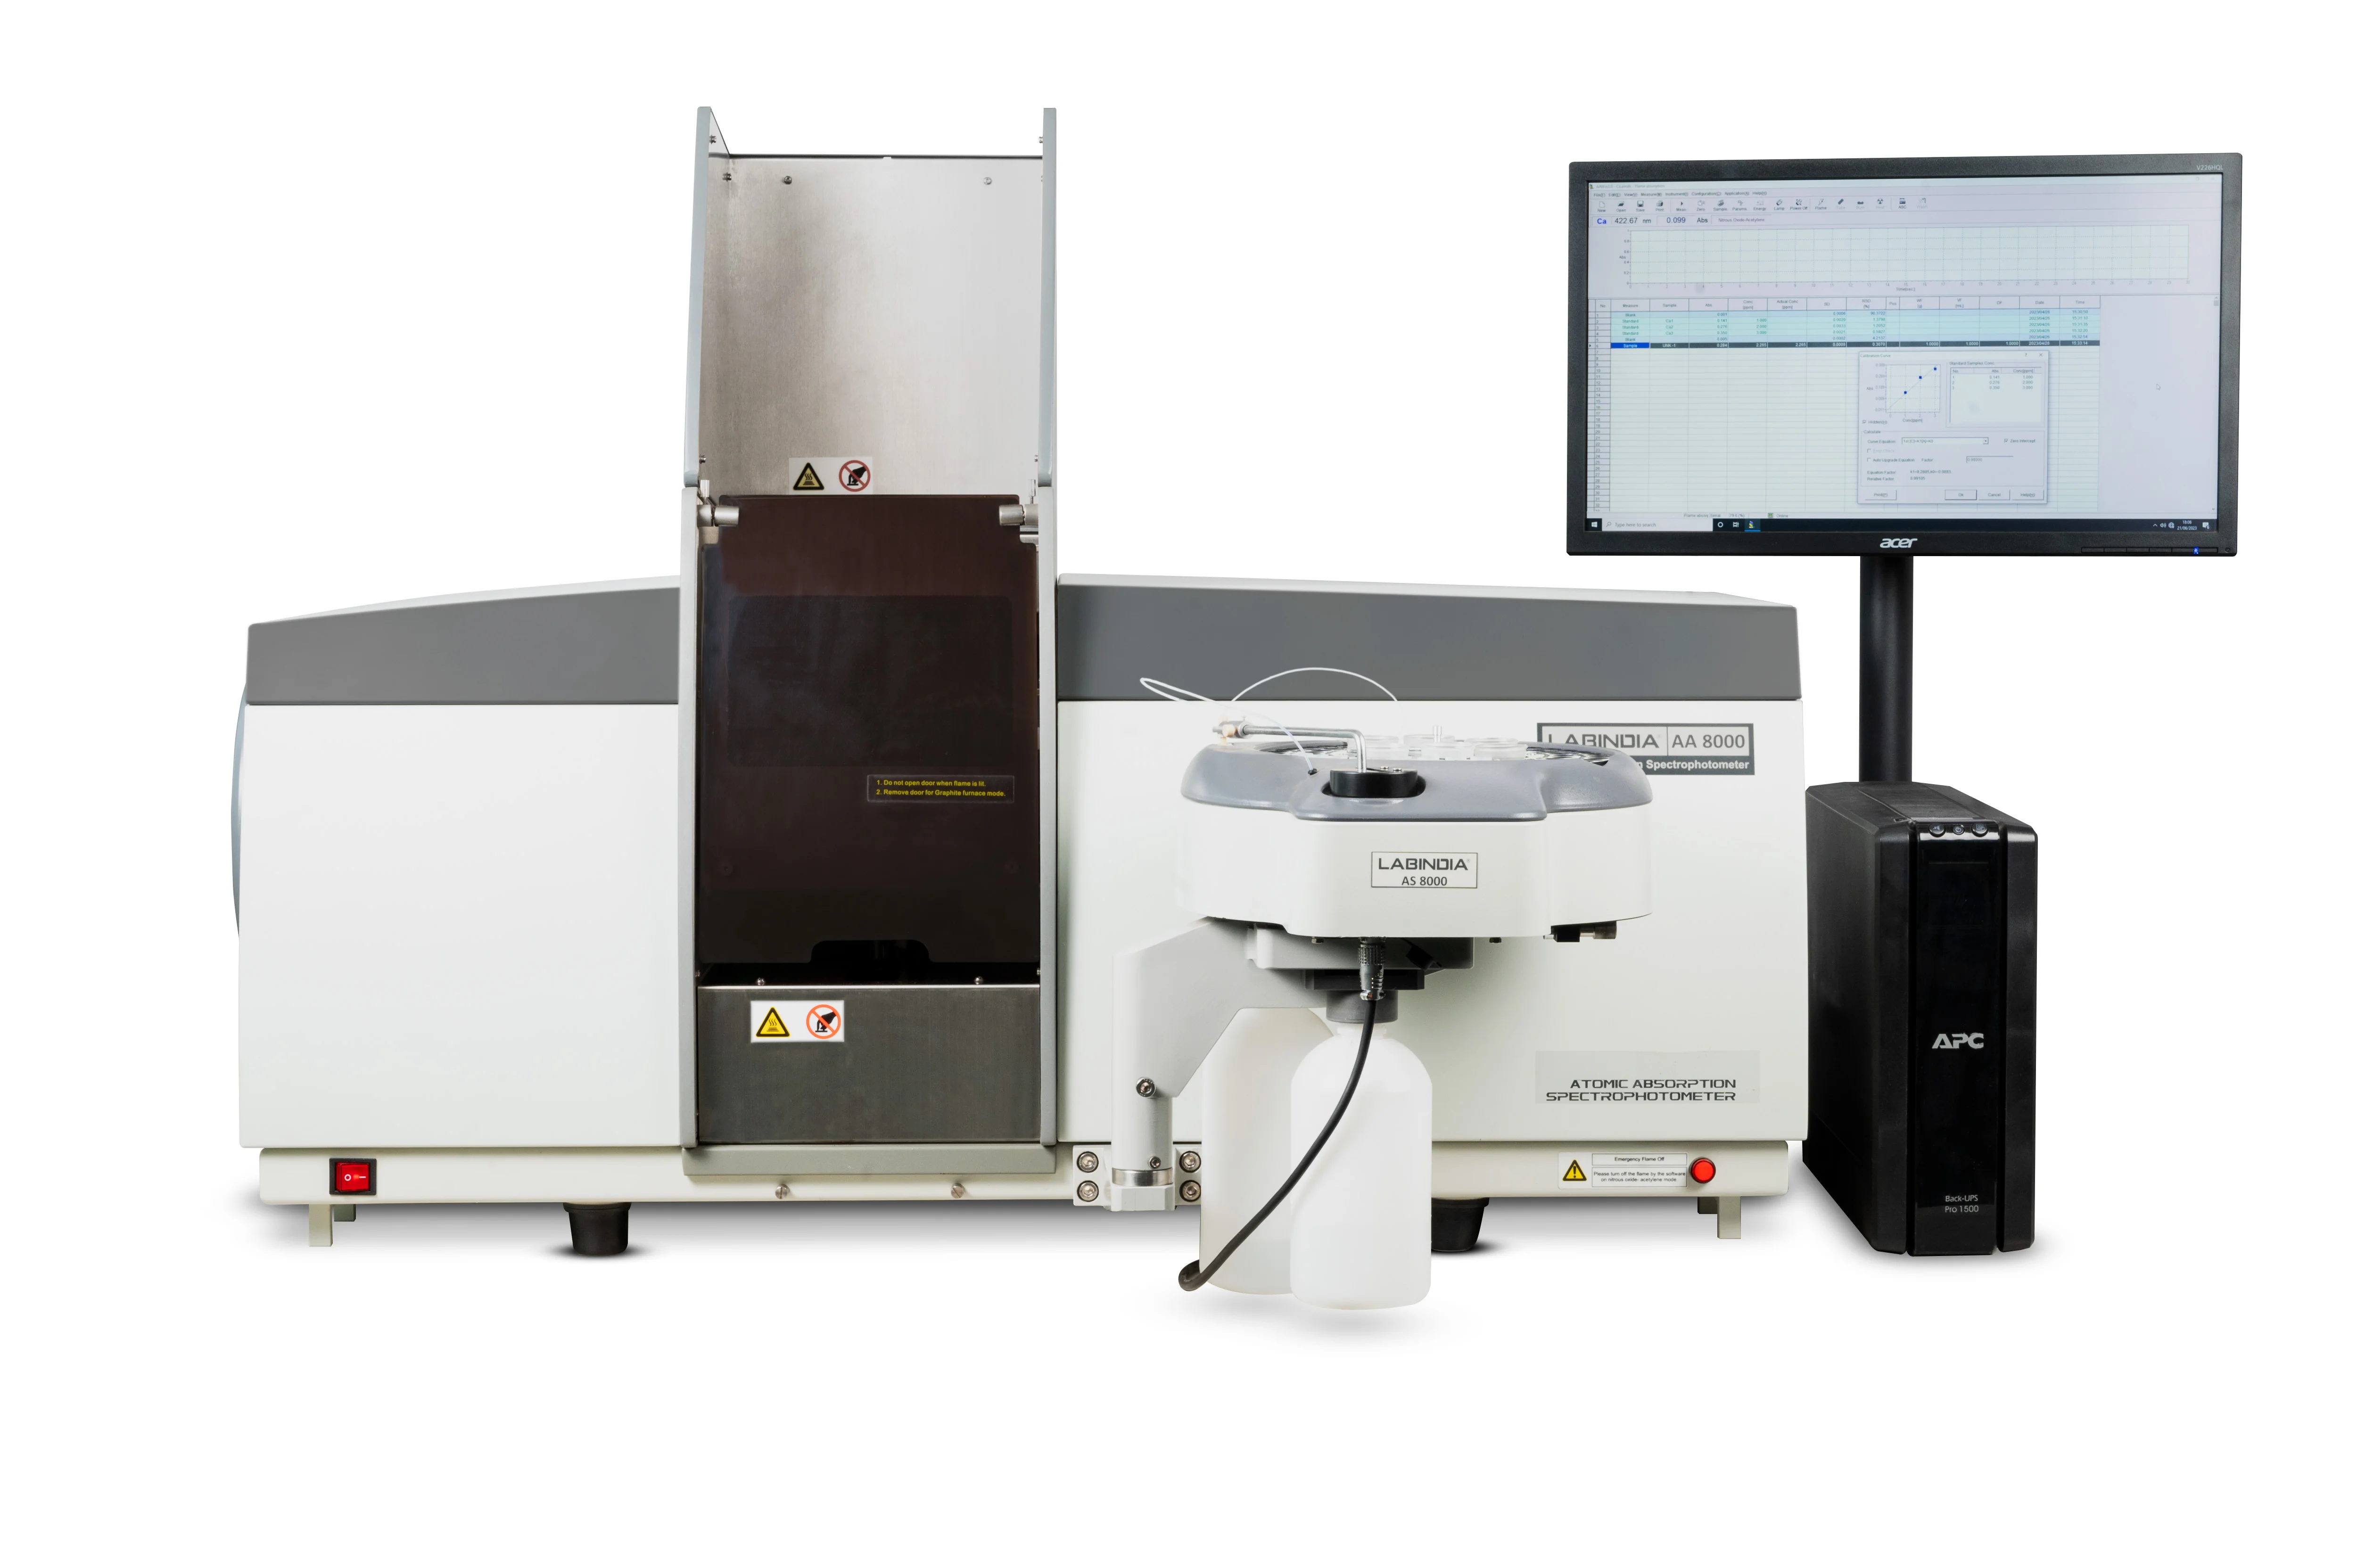 Atomic Absorption Spectrophotometer has a PC system built into the instrument as Standard.